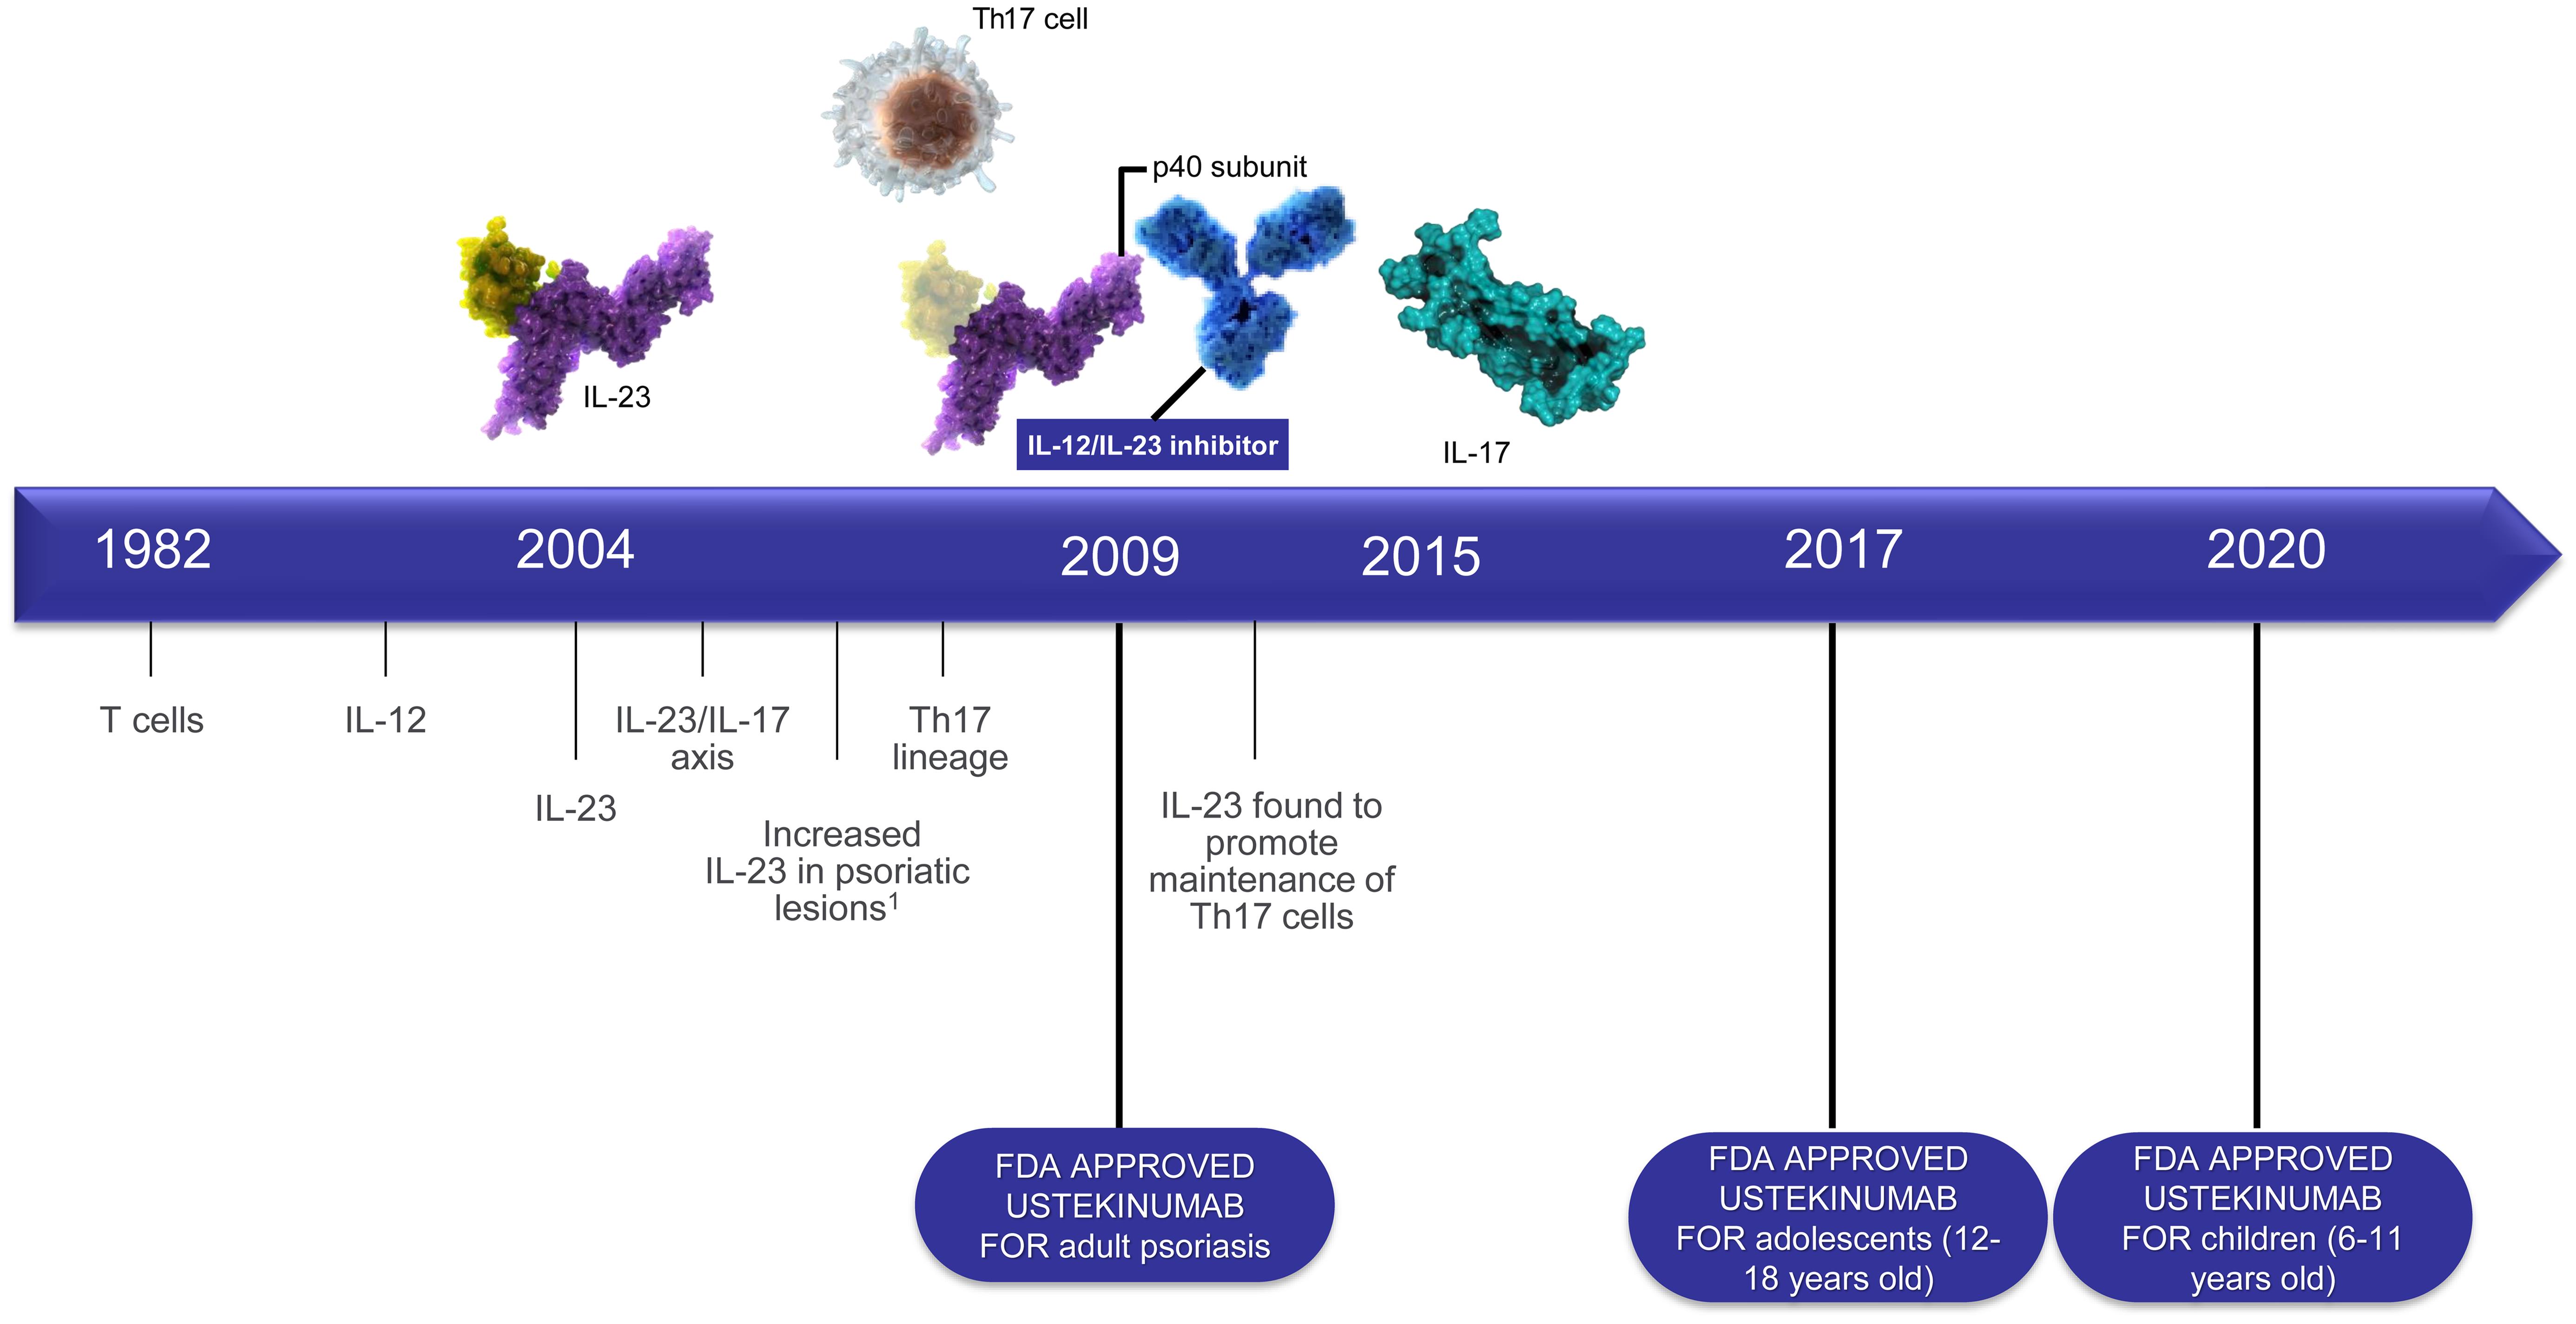 Timeline of the development and approval of ustekinumab for psoriasis.